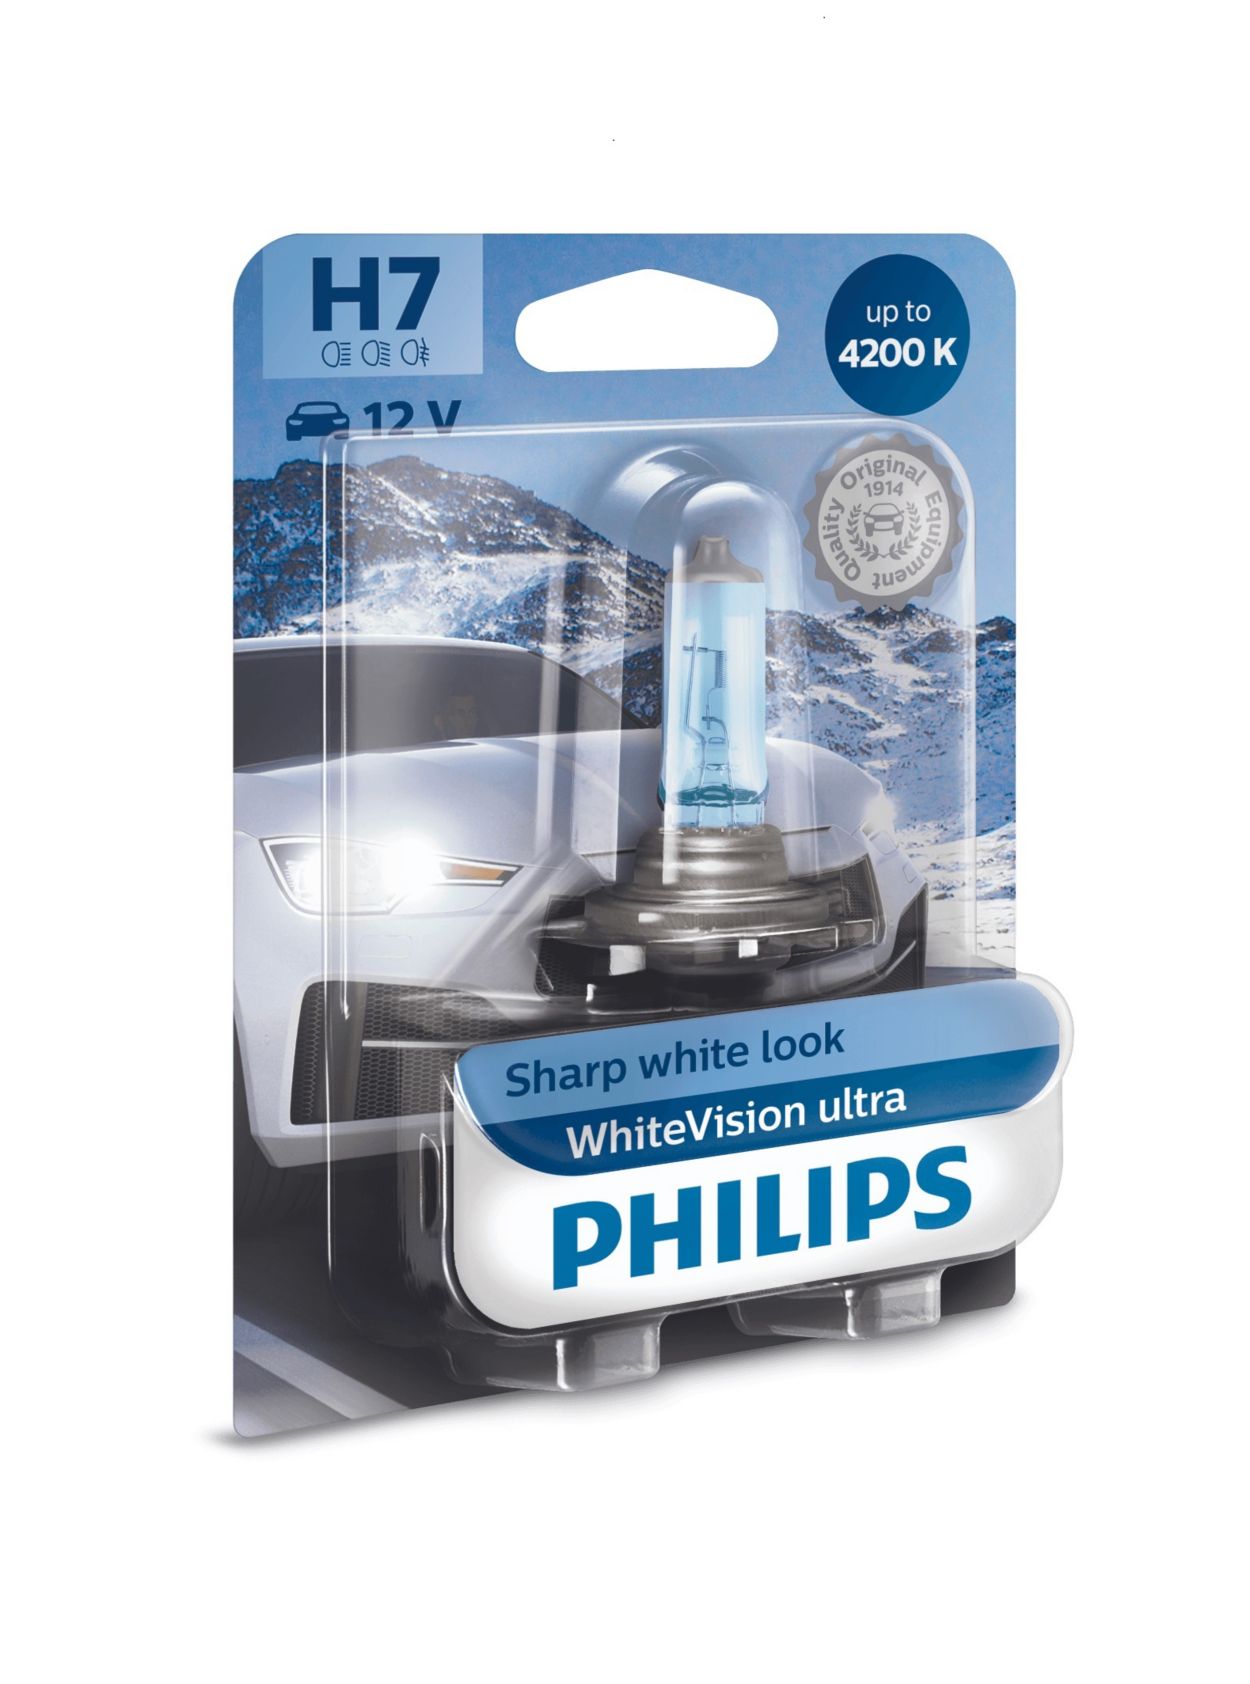 Philips Whitevision ULTRA H7 